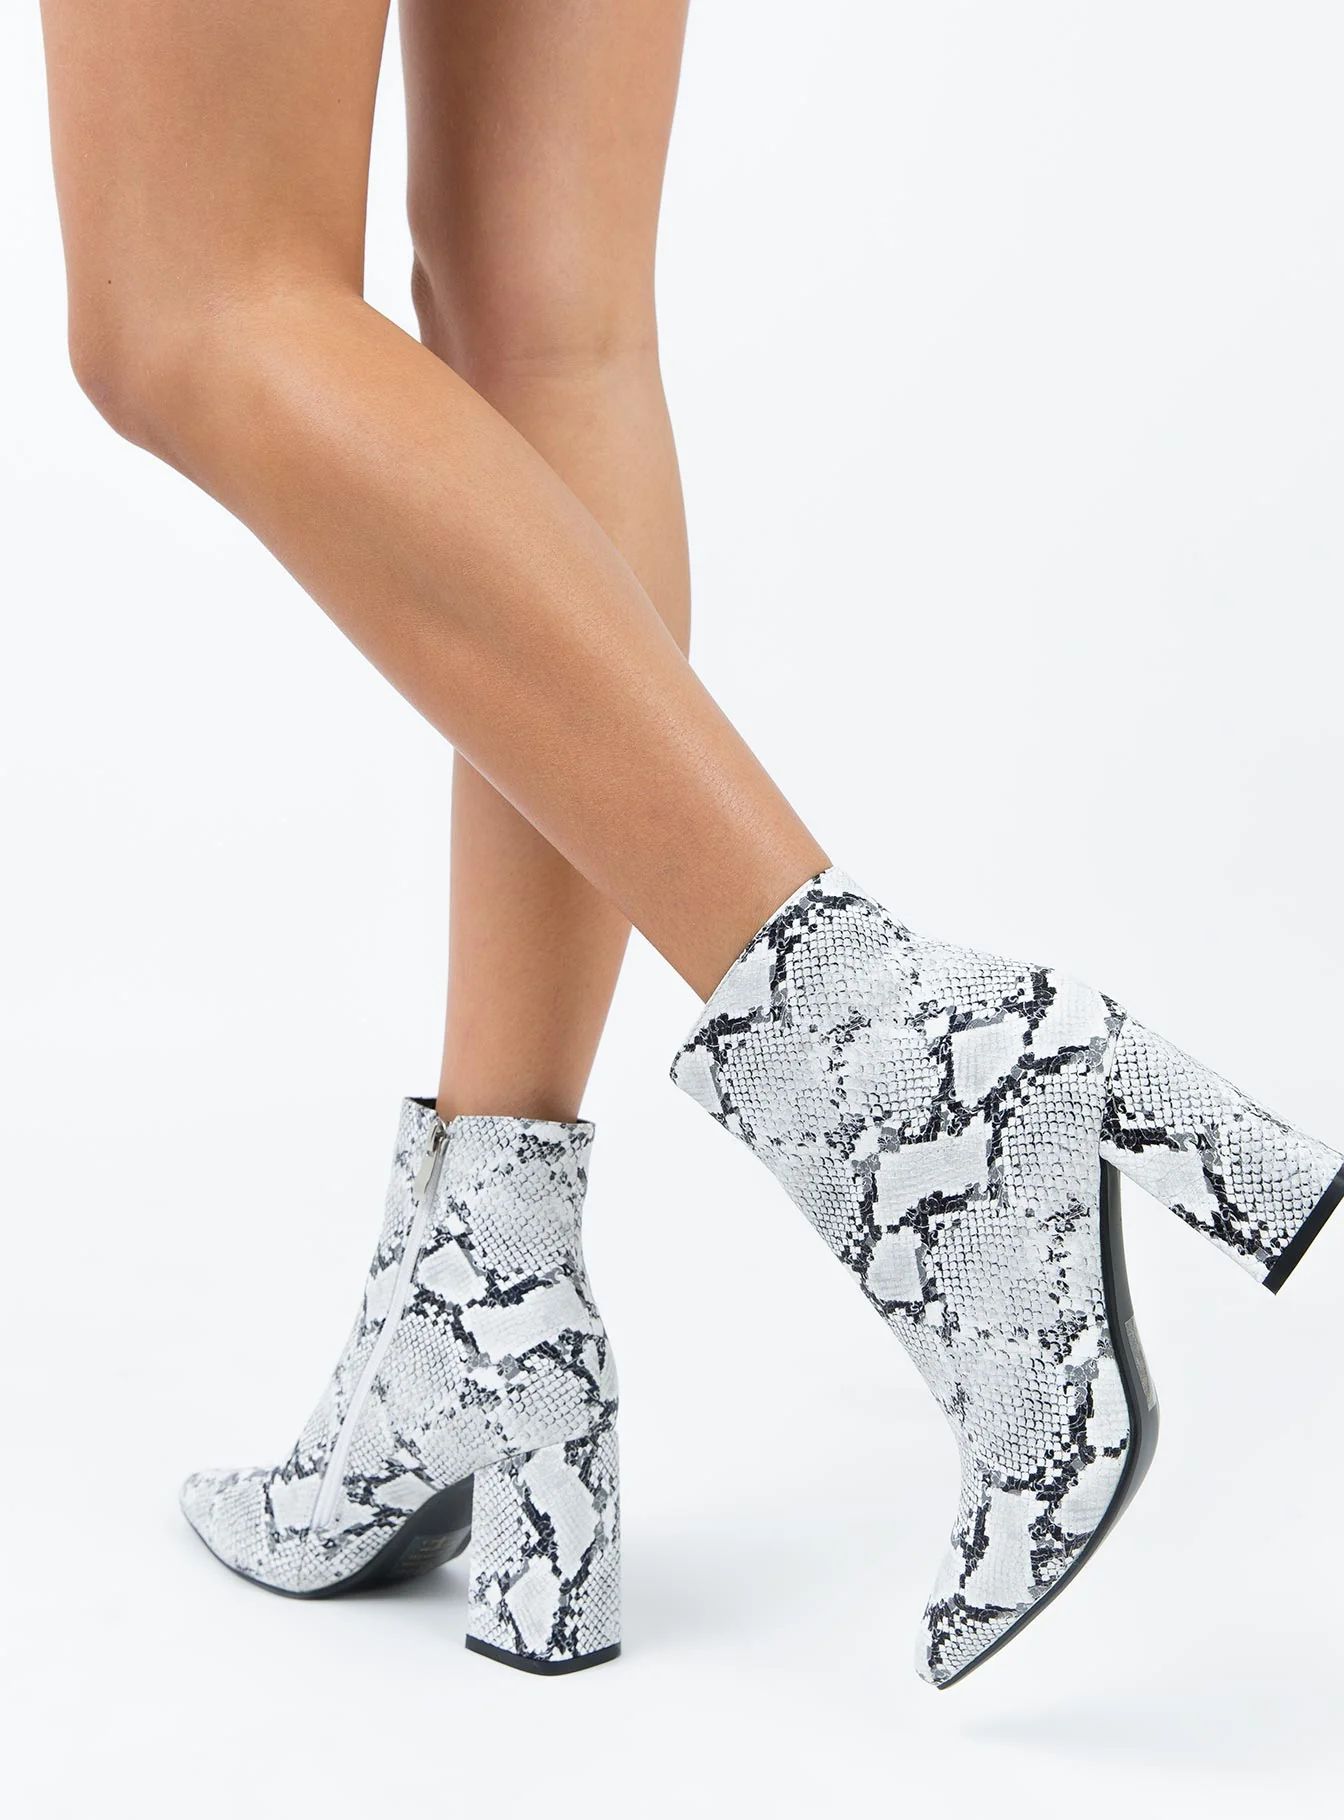 Therapy Snake Alloy Boots Black/White | Princess Polly AU